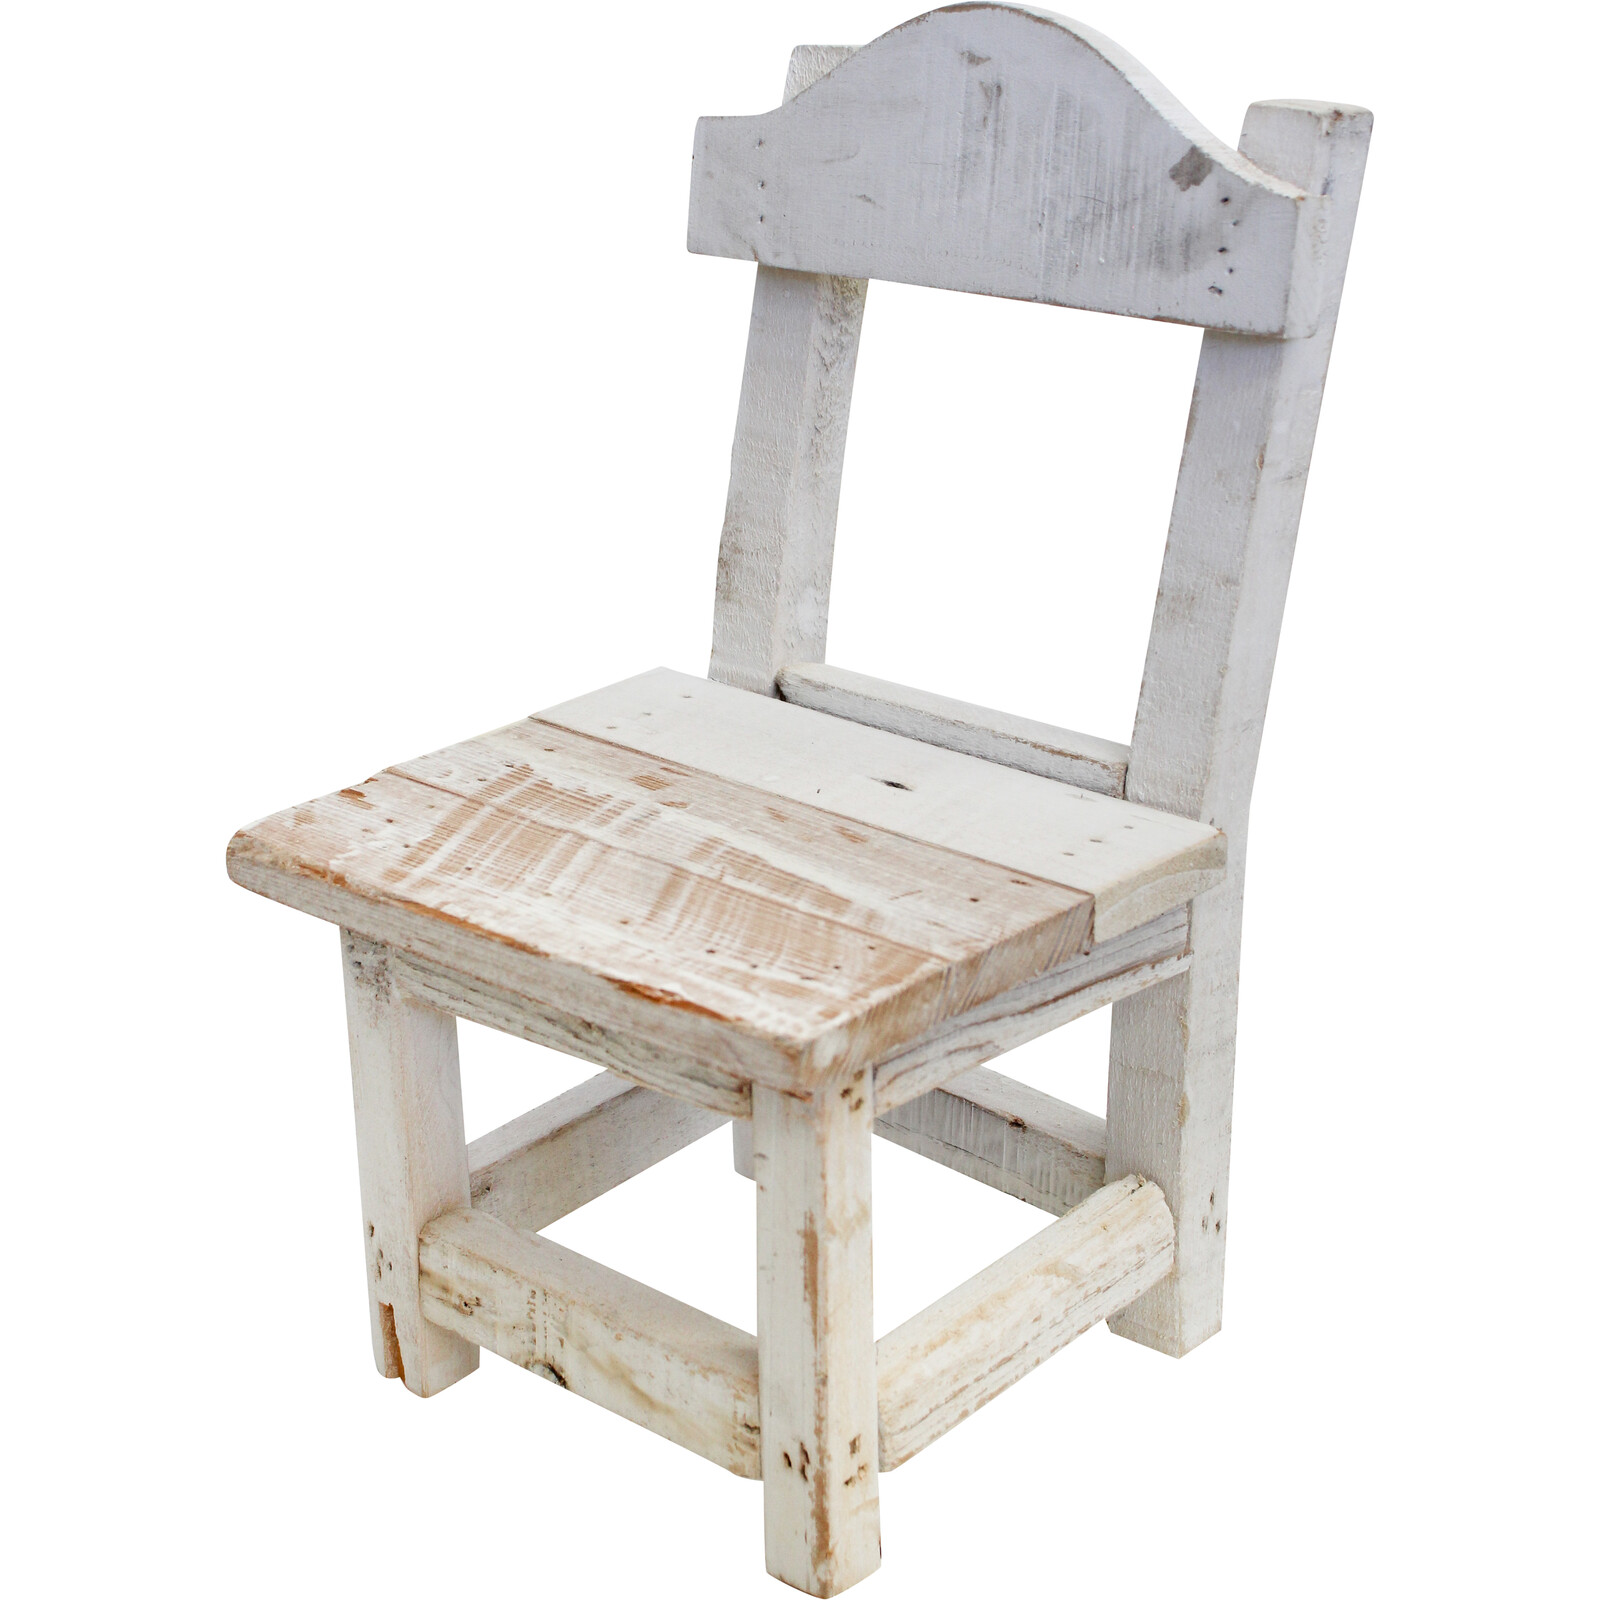 Display Chair Med